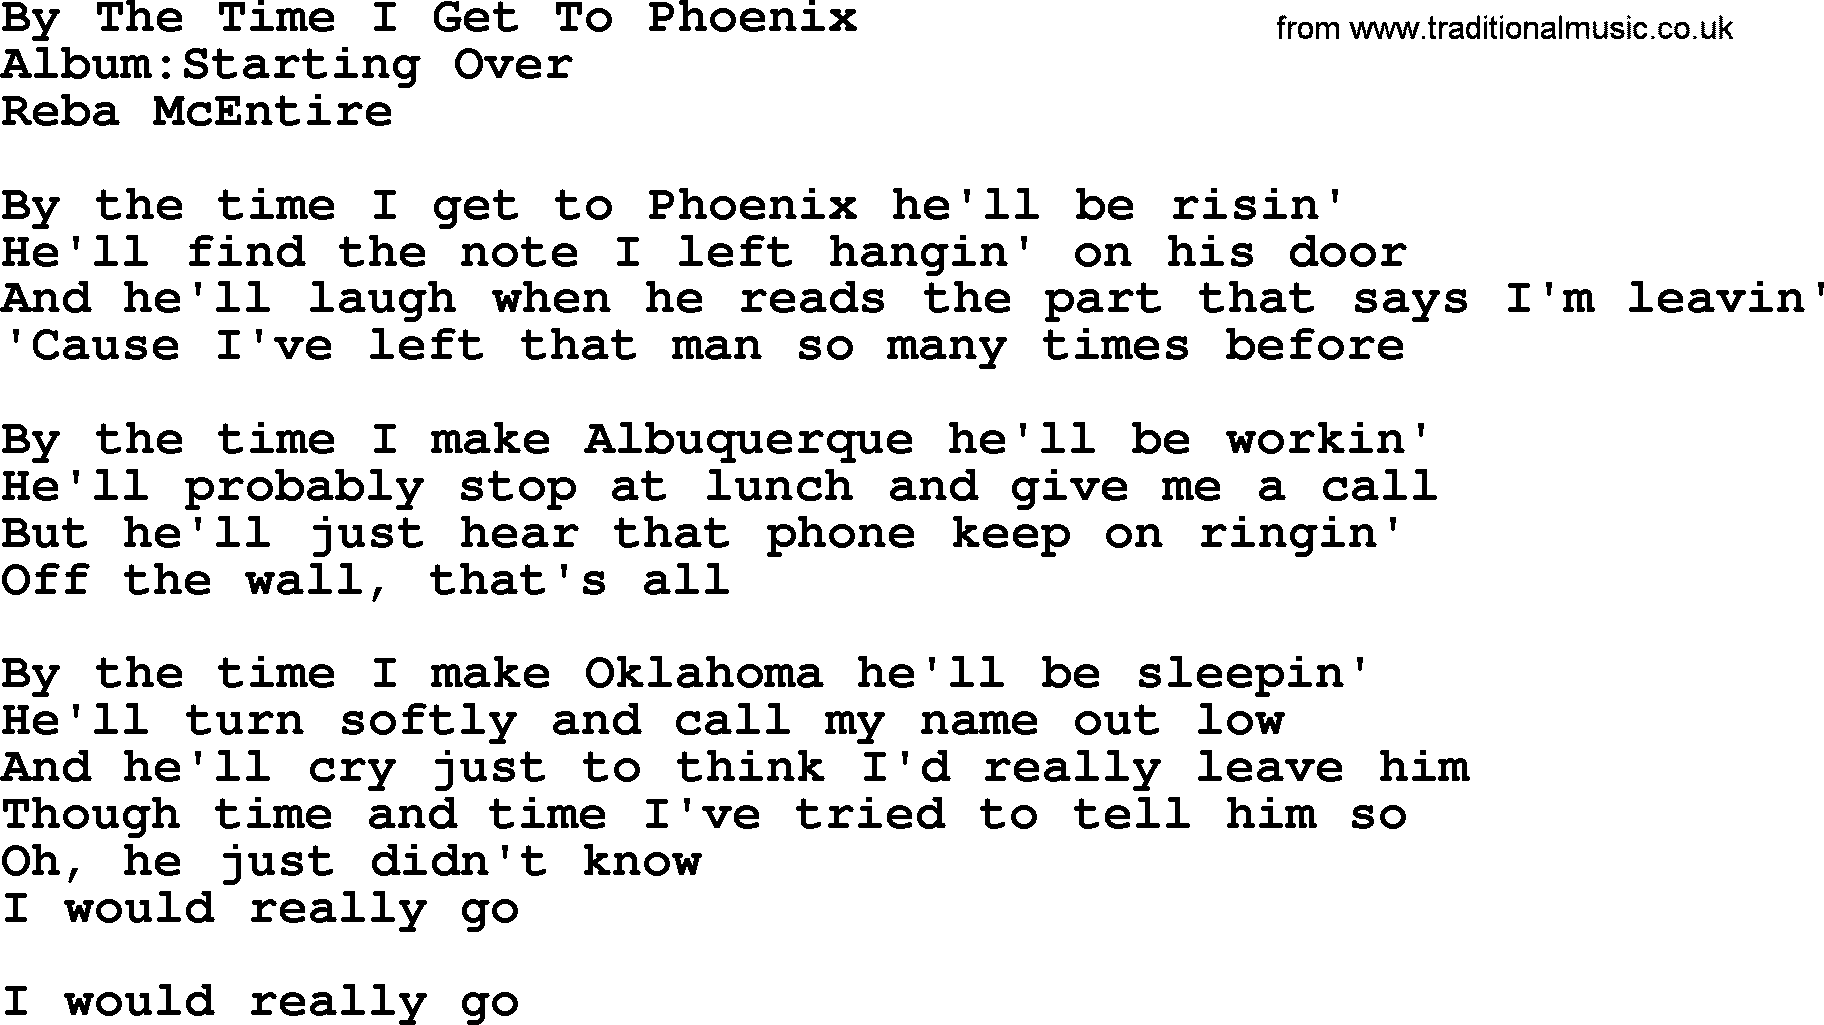 Reba McEntire song: By The Time I Get To Phoenix lyrics